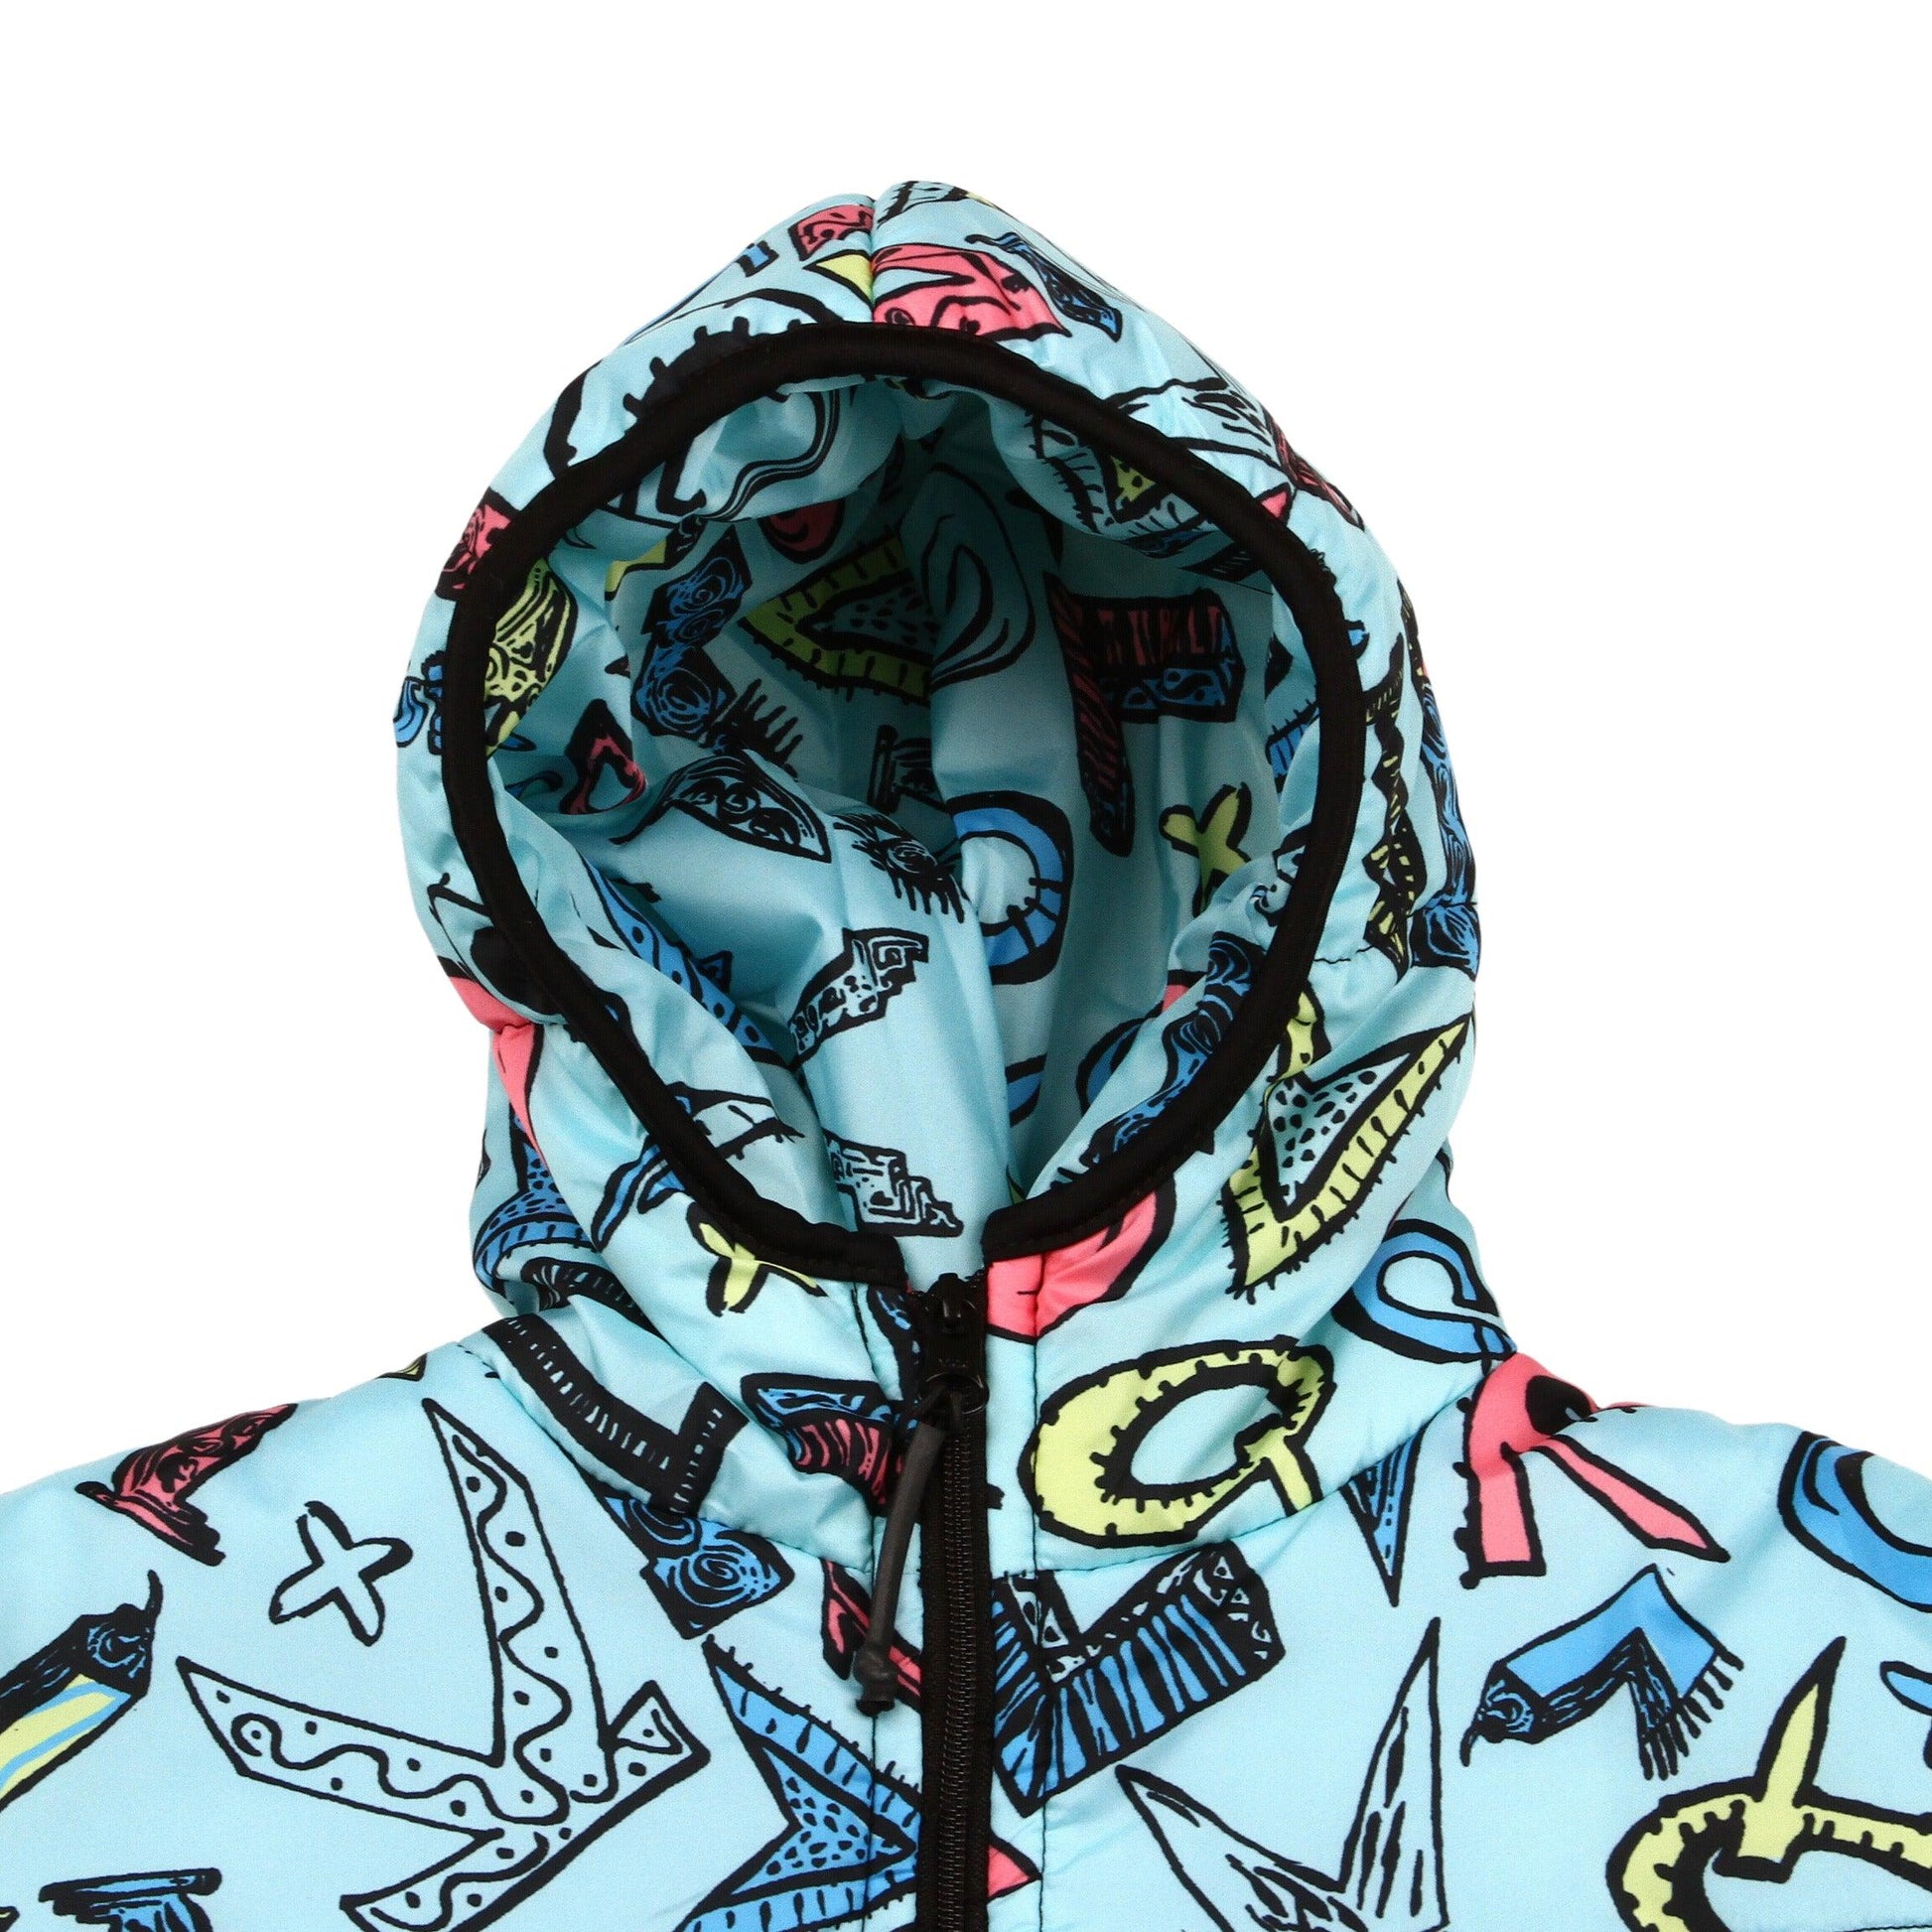 Campera Quiksilver Scaly Print Boys Verde Agua - Indy